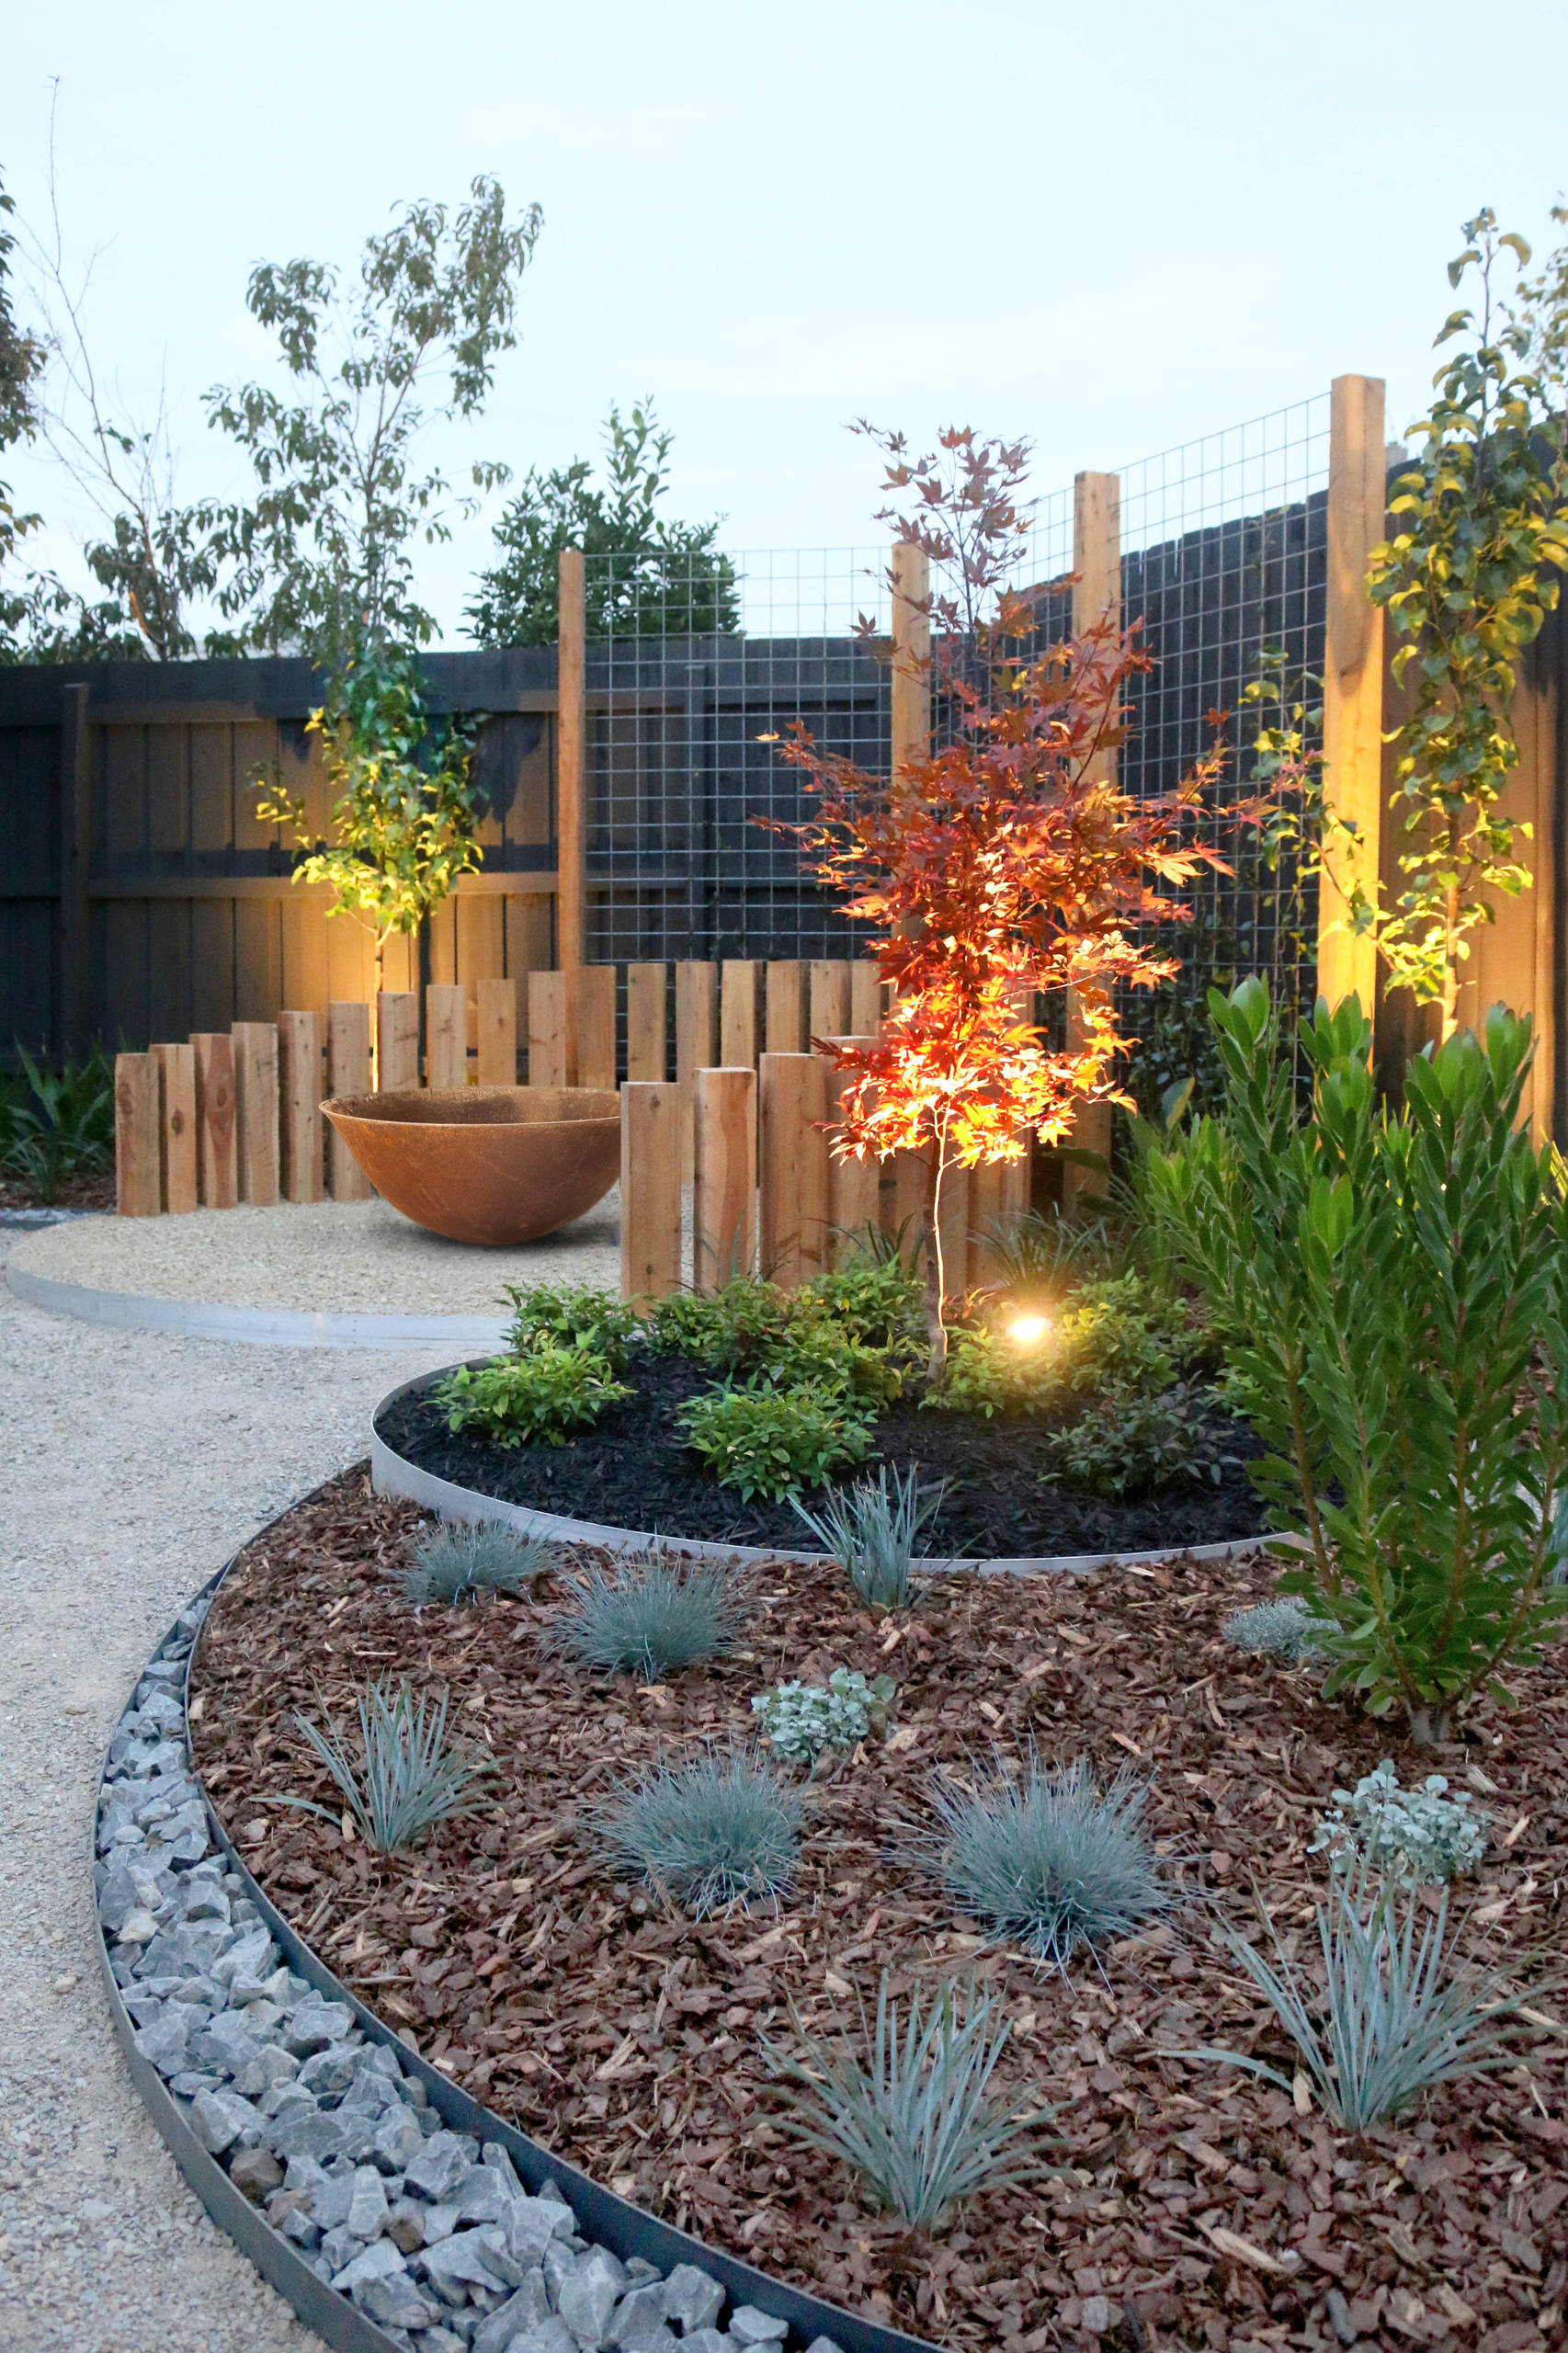 Mulch Landscaping With A Fire Pit, Wood Chips For Fire Pit